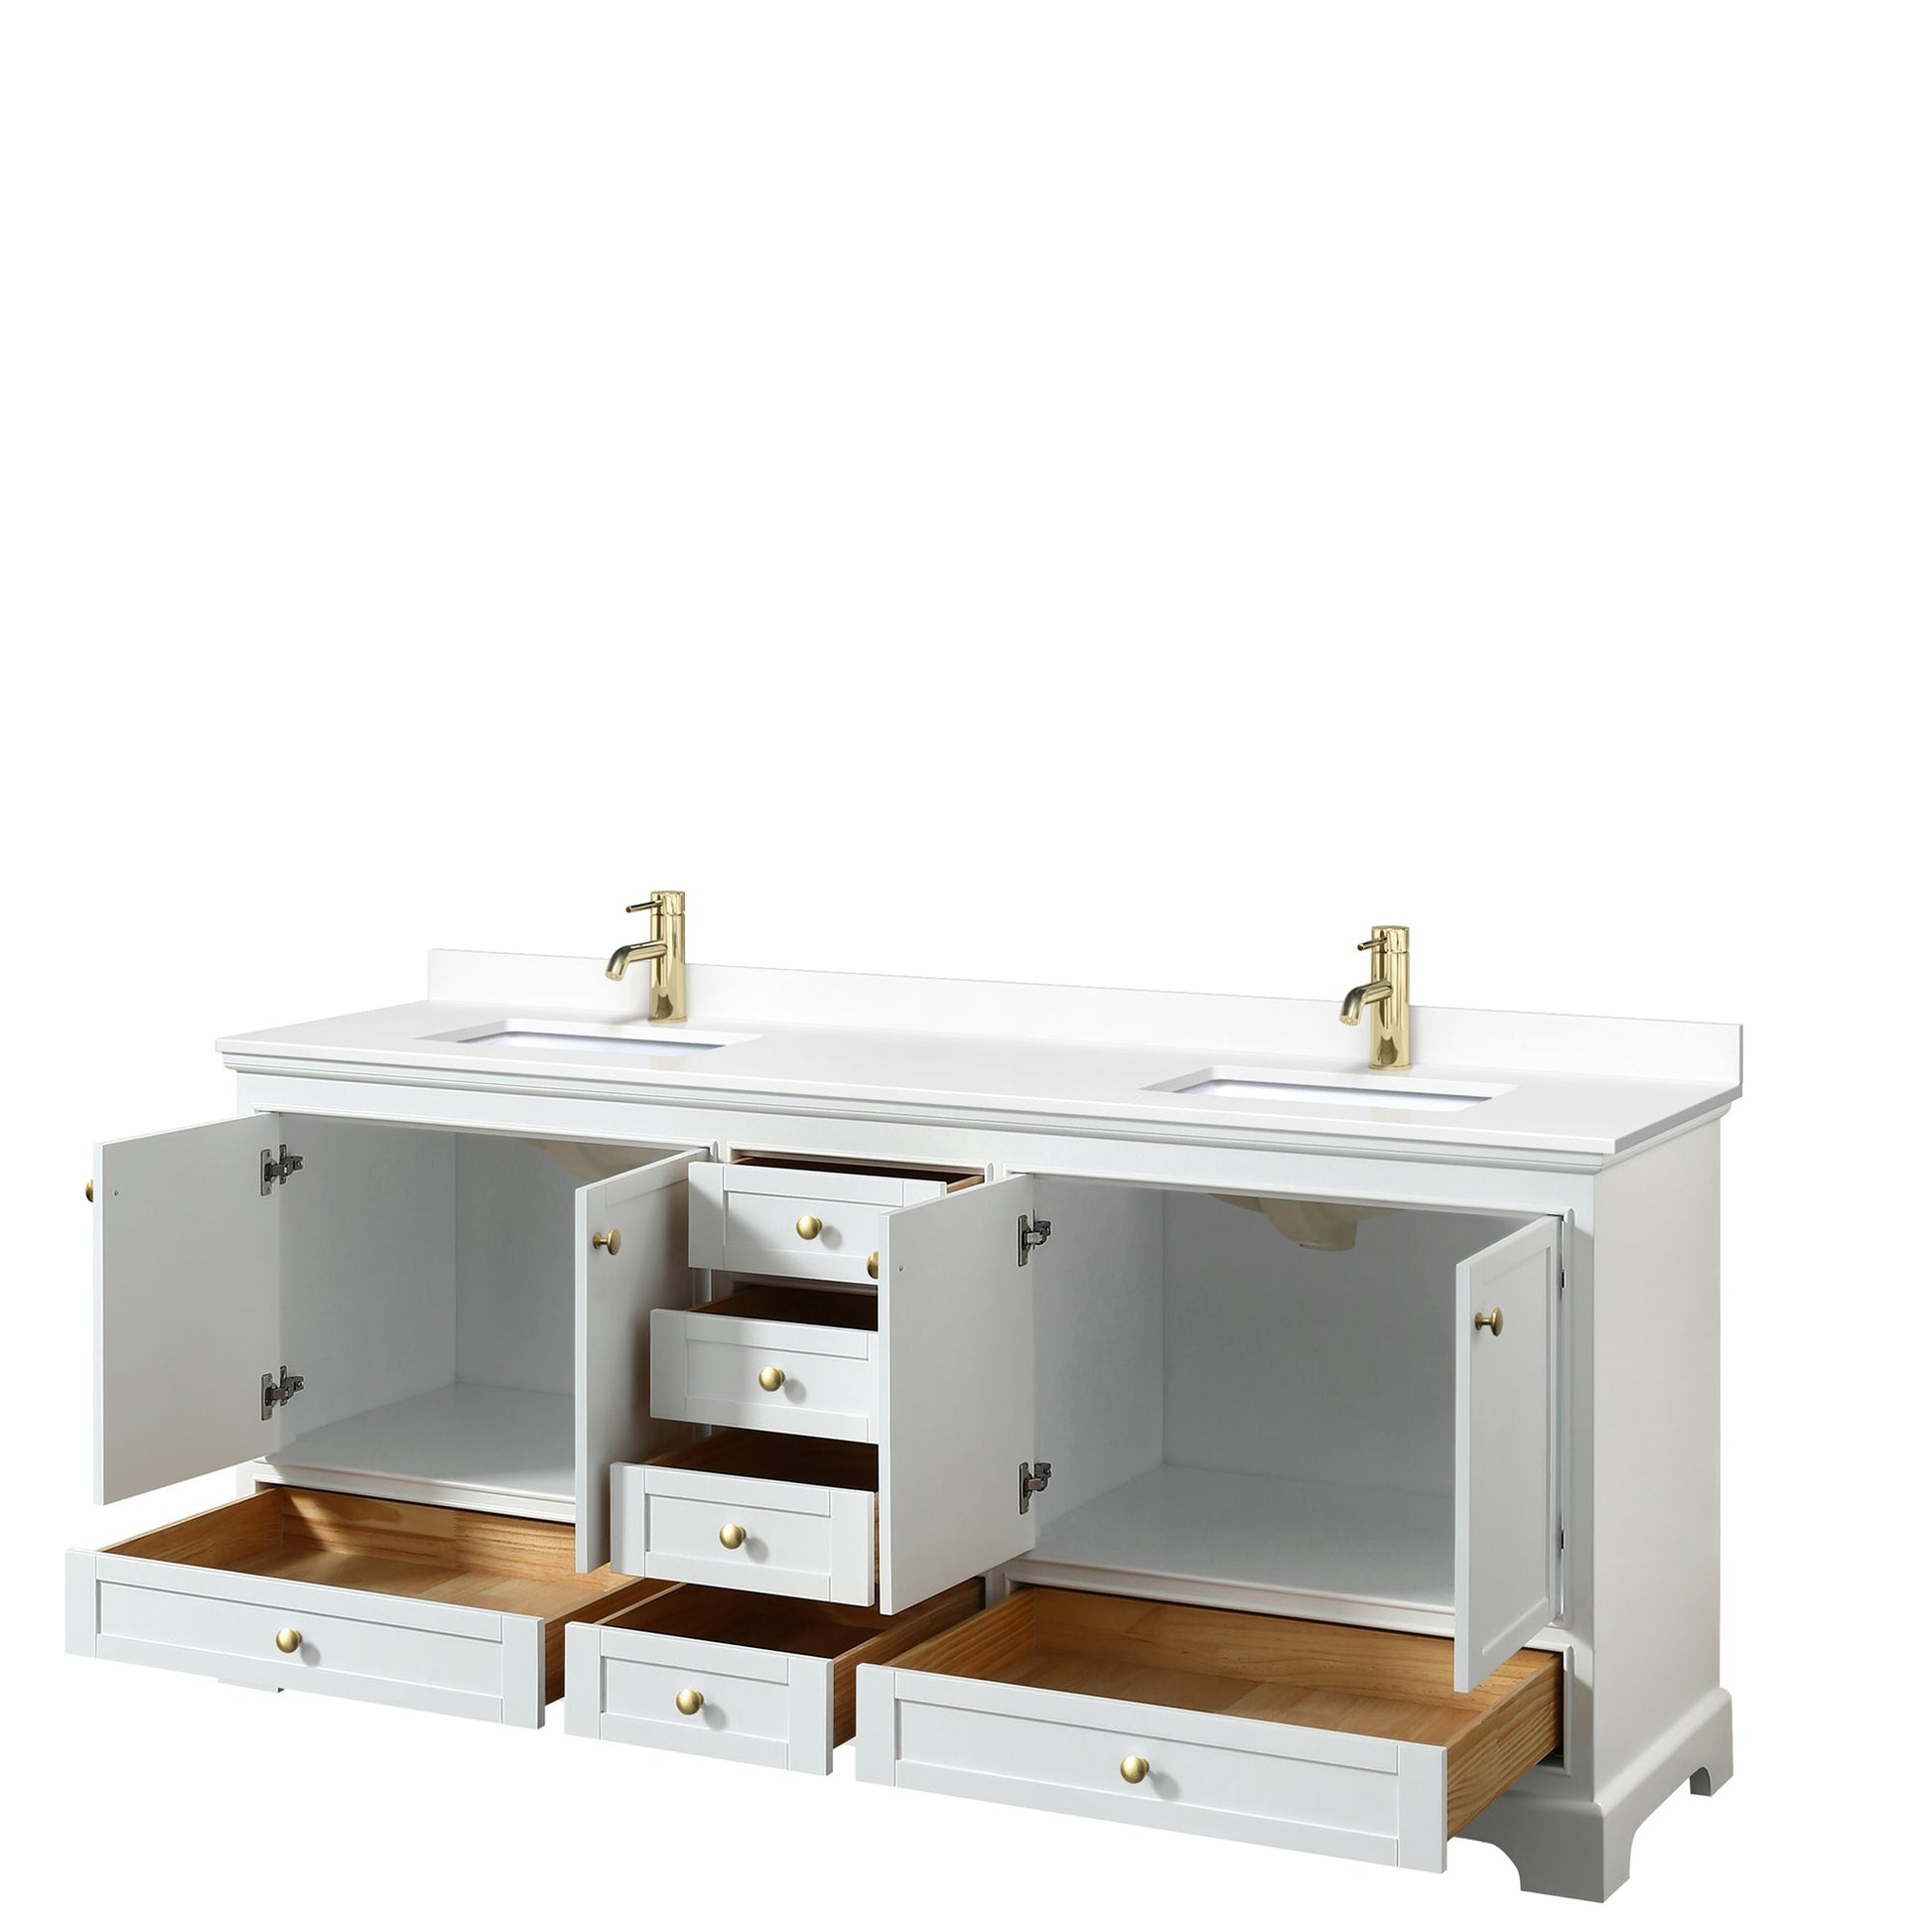 Wyndham Collection Deborah 80" Double Bathroom Vanity in White, White Cultured Marble Countertop, Undermount Square Sinks, Brushed Gold Trim, No Mirror